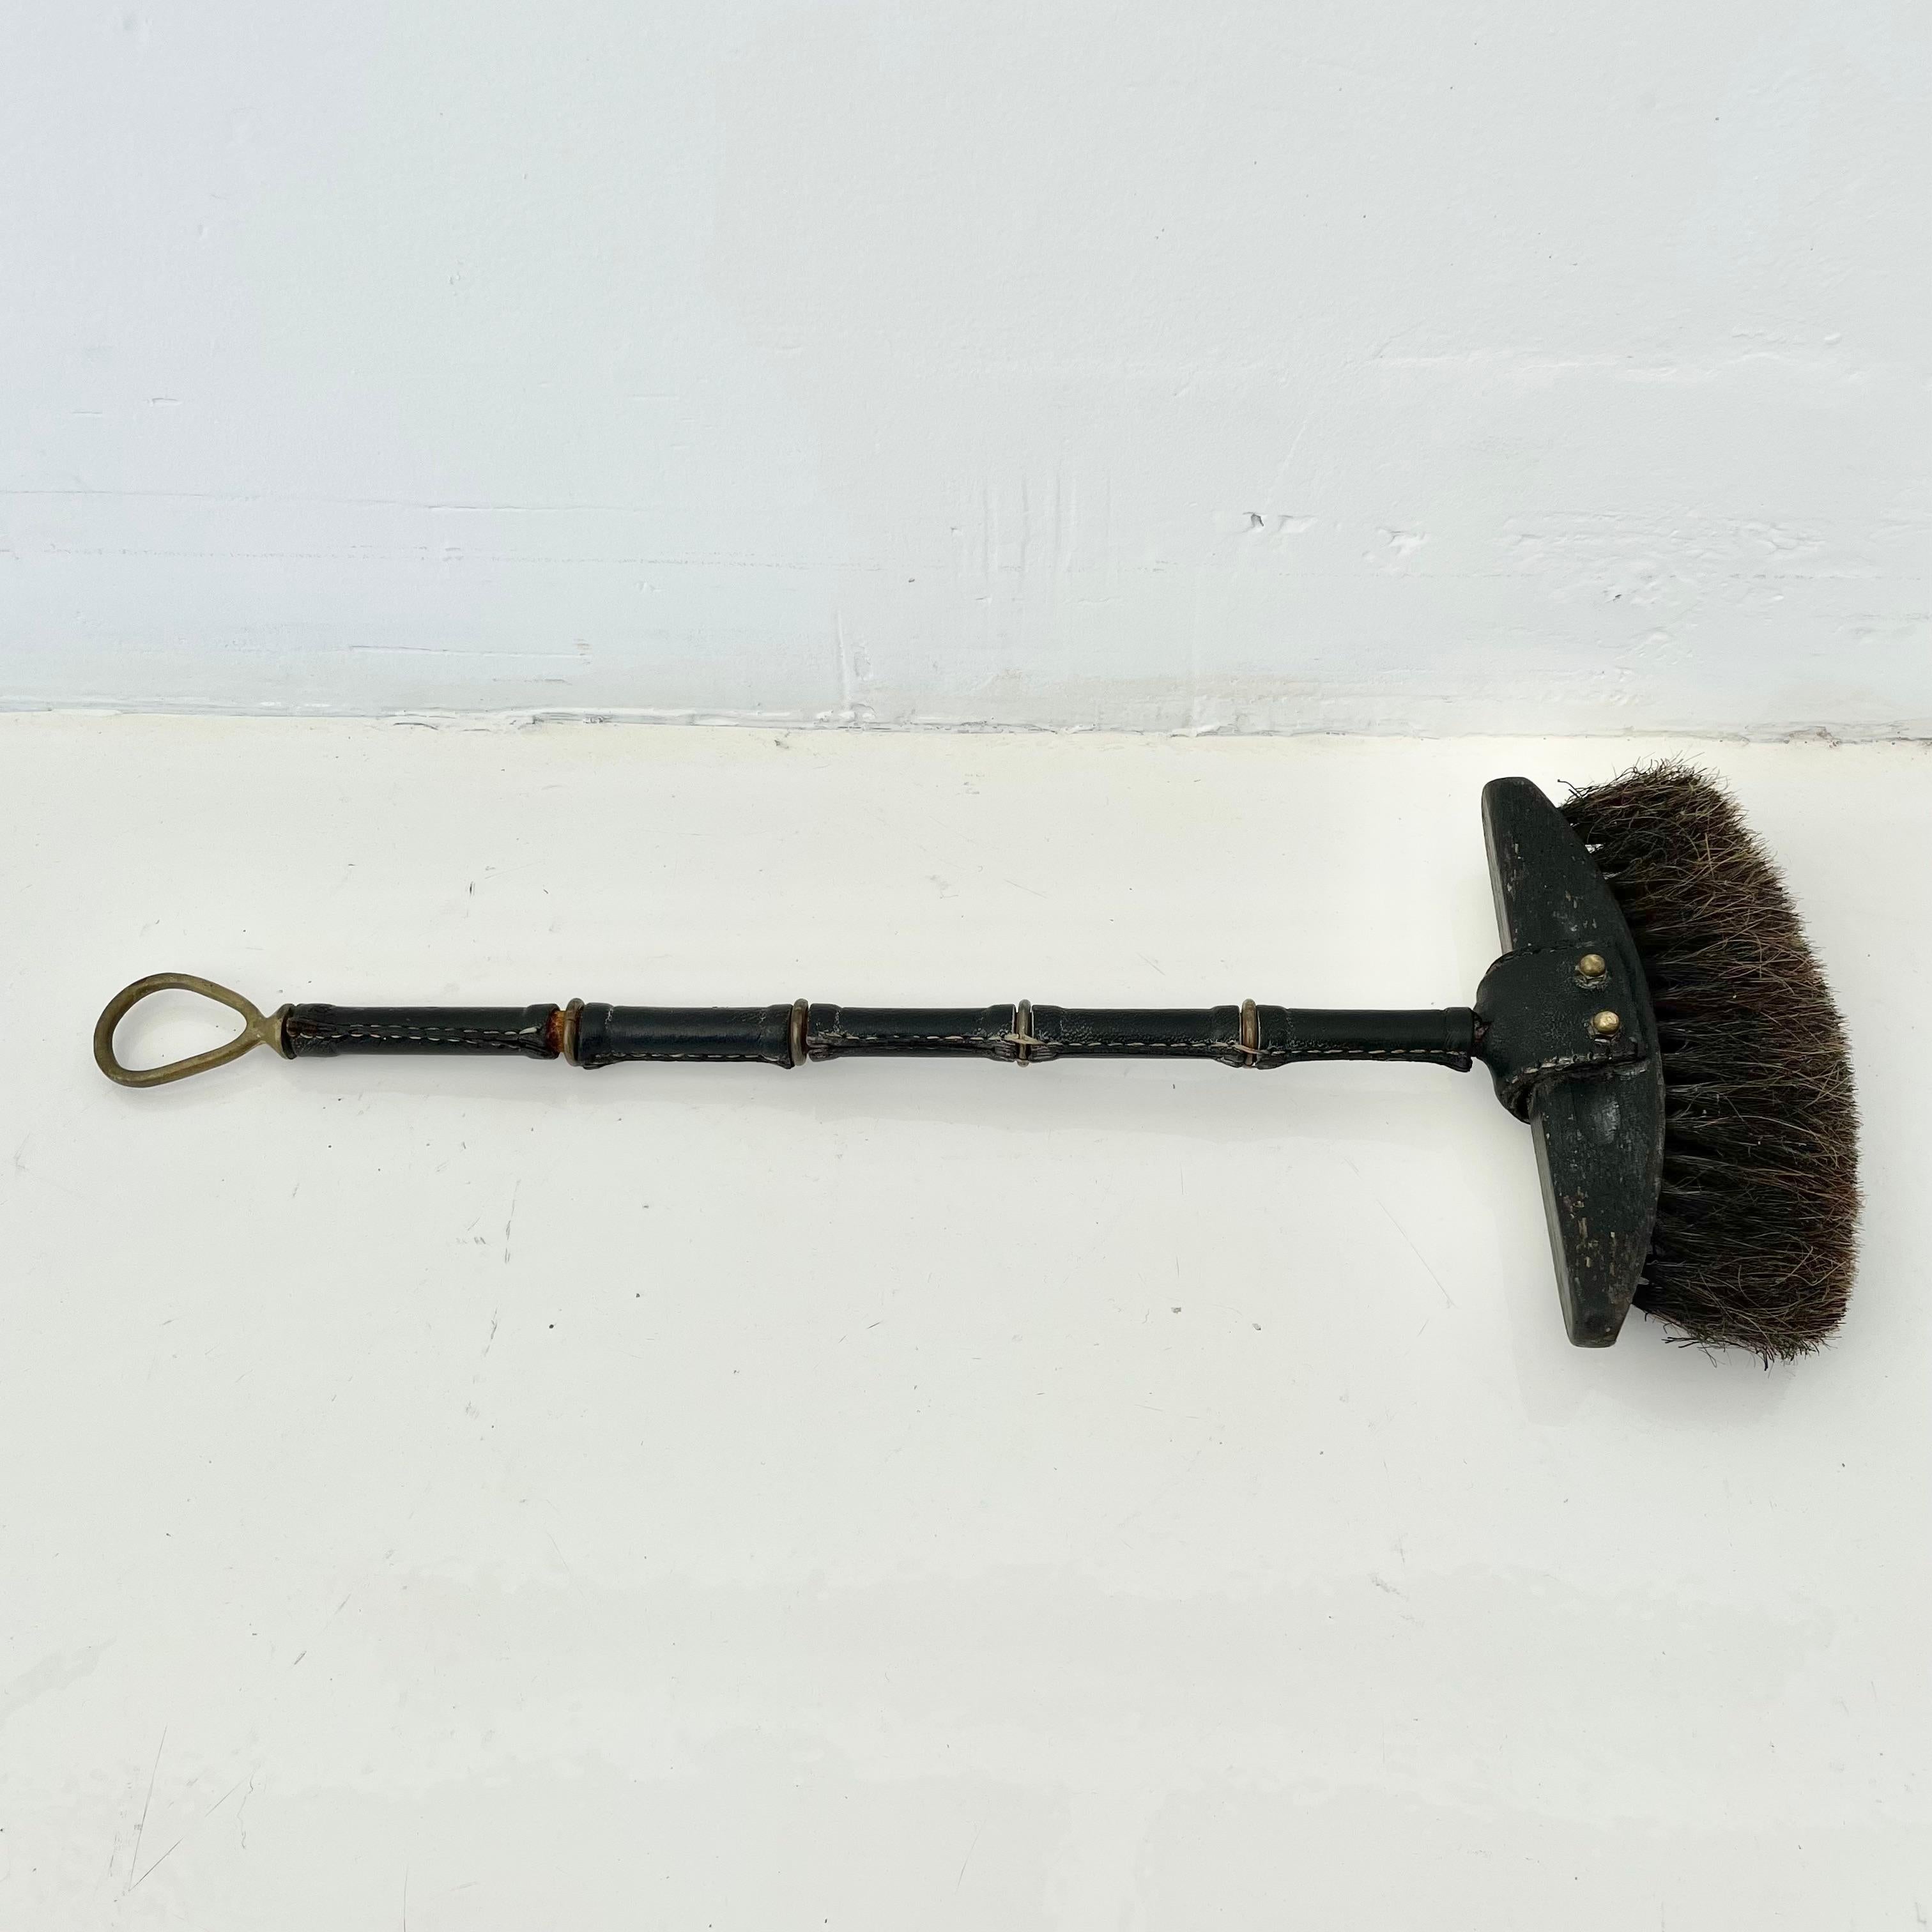 A very rare fireplace broom by Jacques Adnet. Classic Adnet style with the shaft fully wrapped in black leather spaced with brass rings and a brass loop on the end of the handle for hanging. The wooden head is attached with a leather crown and brass